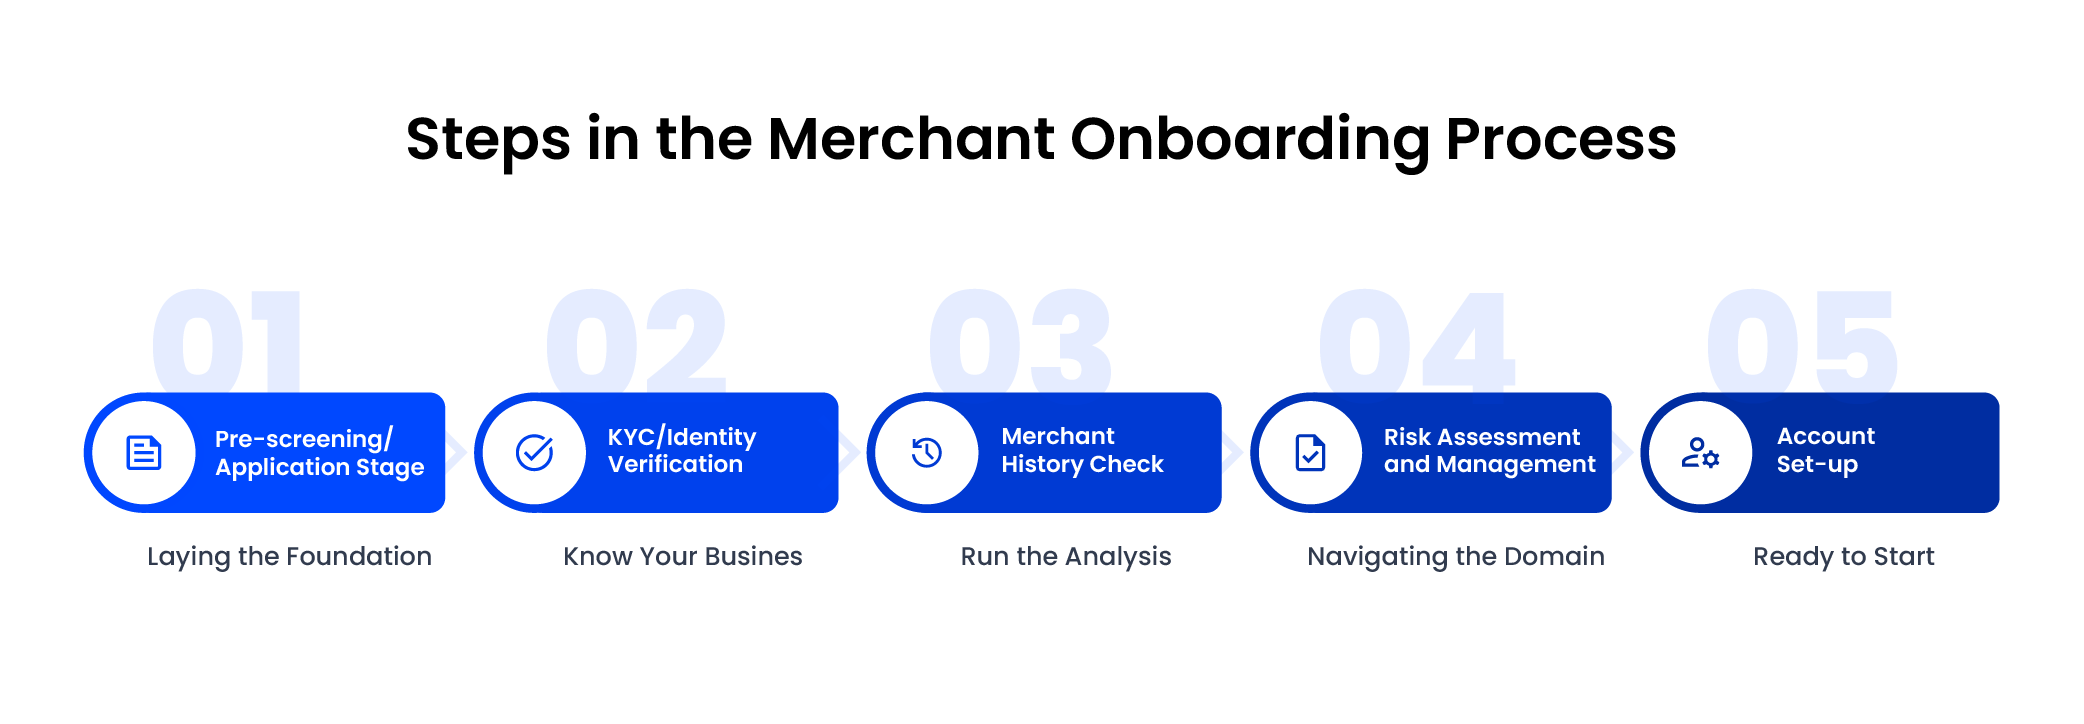 Steps-in-the-Merchant-Onboarding-Process